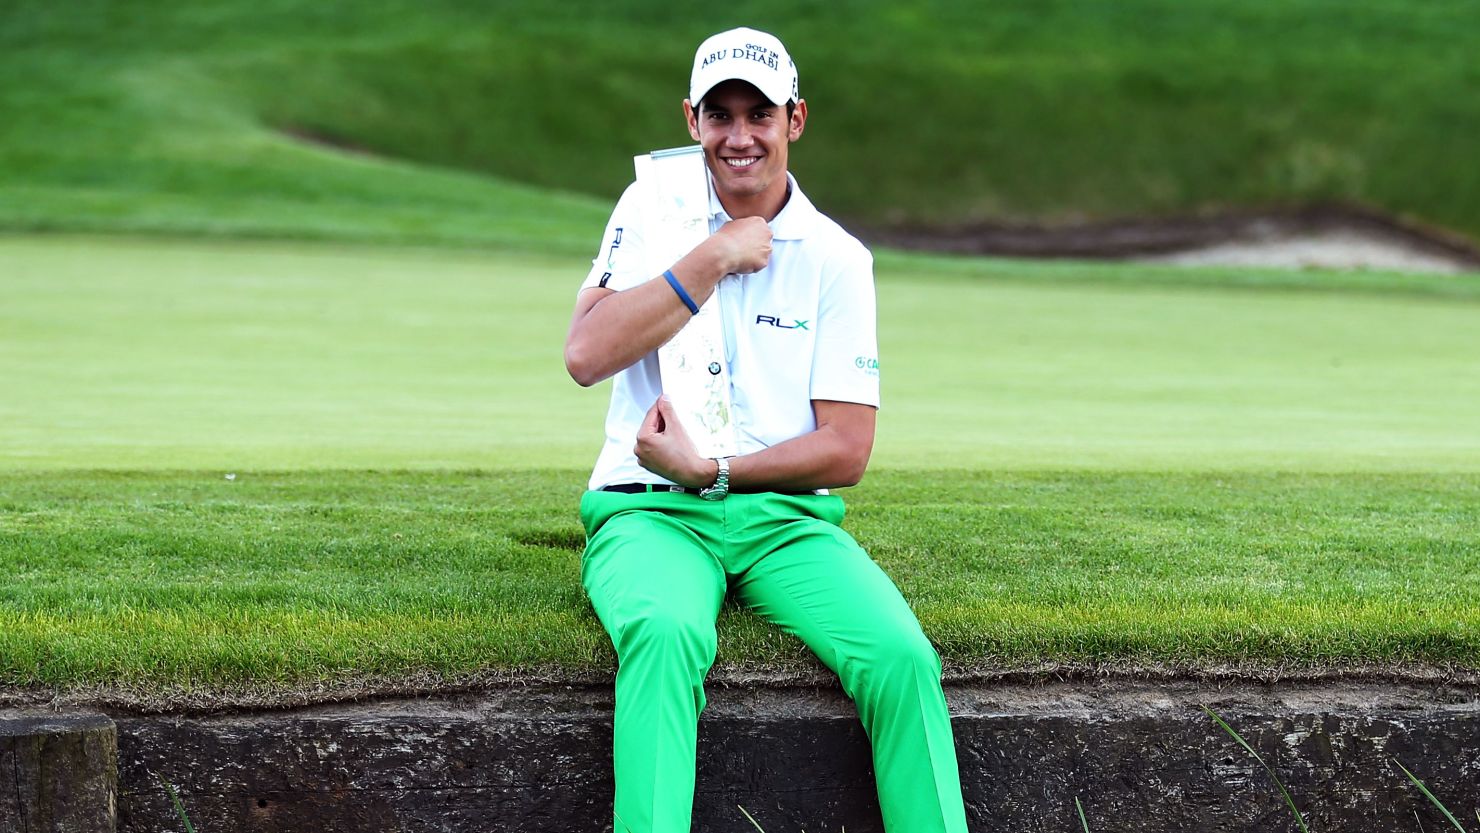 Italy's Matteo Manassero was all smiles after winning the PGA Championship in a playoff. 